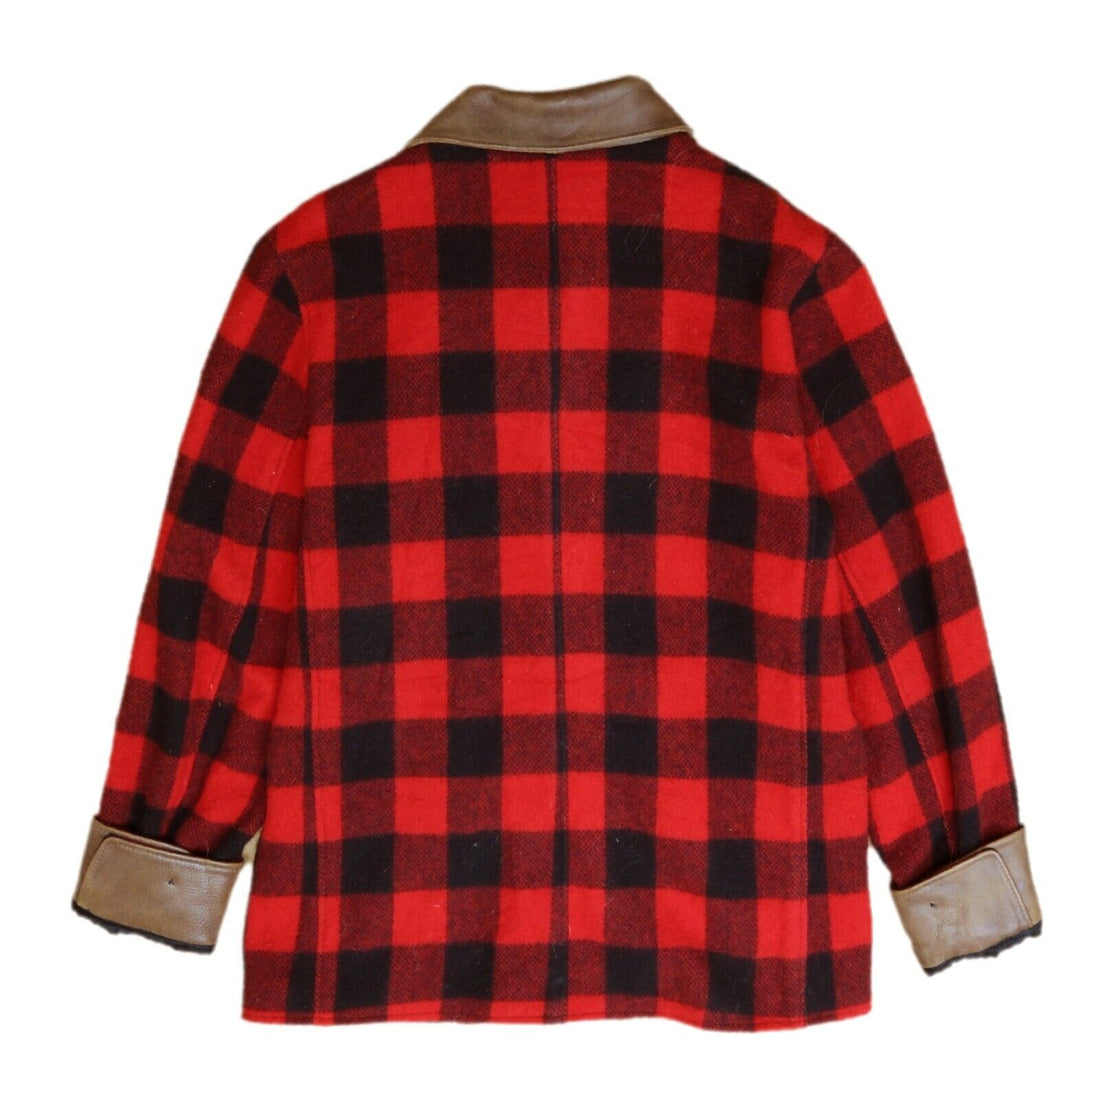 Vintage Roots Wool Plaid Button Up Field Coat Jacket Size Large Red 90s